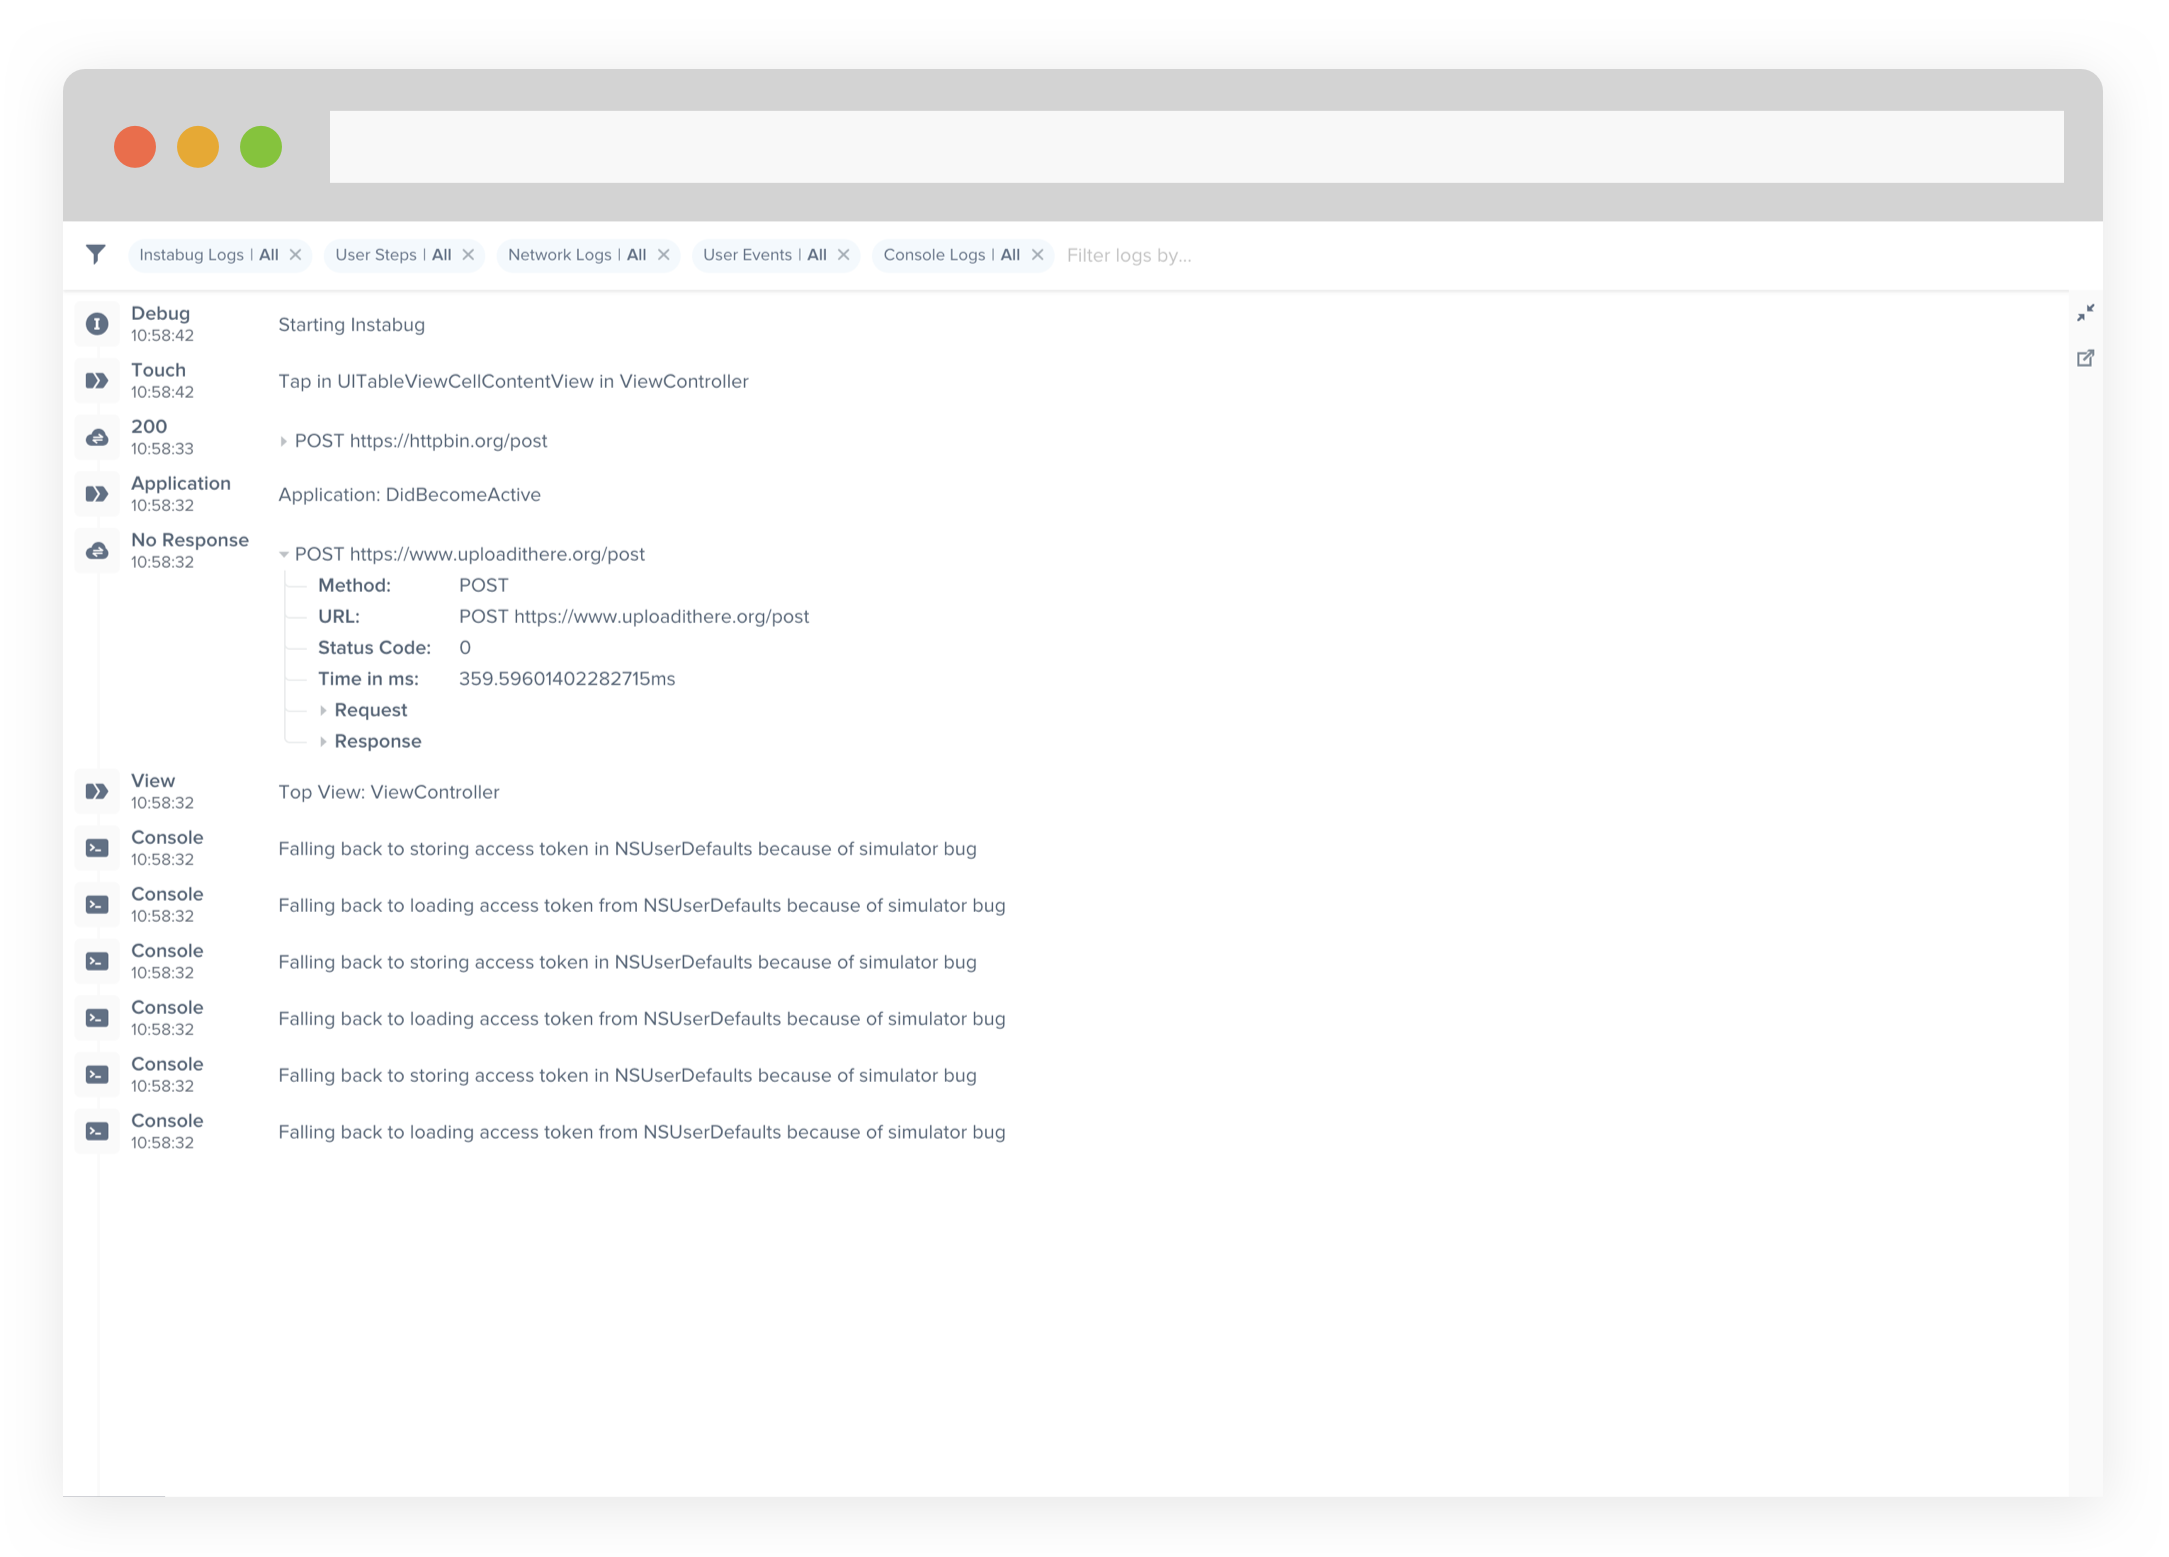 An example of the expanded logs view from your dashboard.